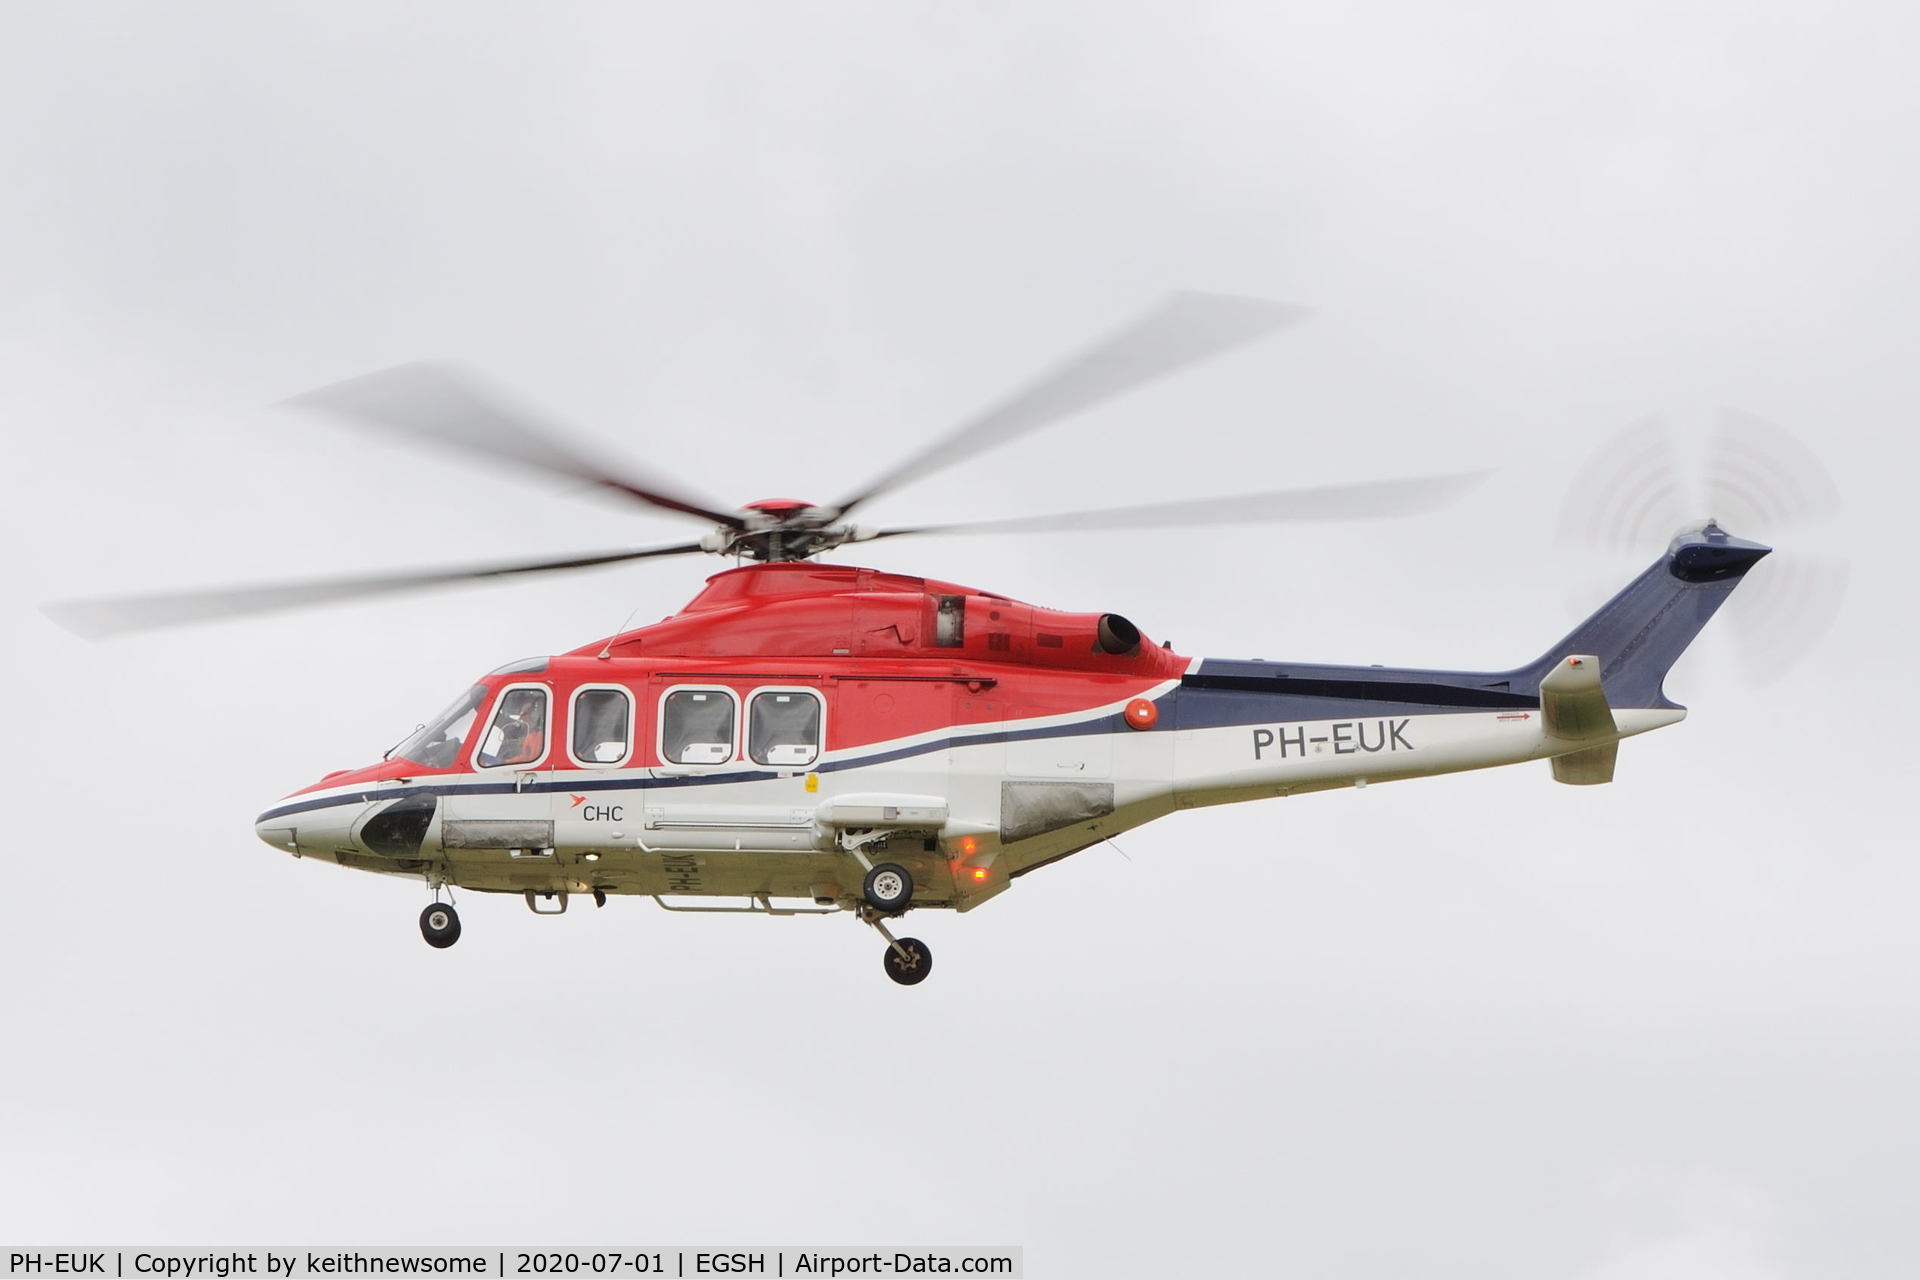 PH-EUK, 2013 AgustaWestland AW-139 C/N 31474, Arriving at Norwich from offshore.